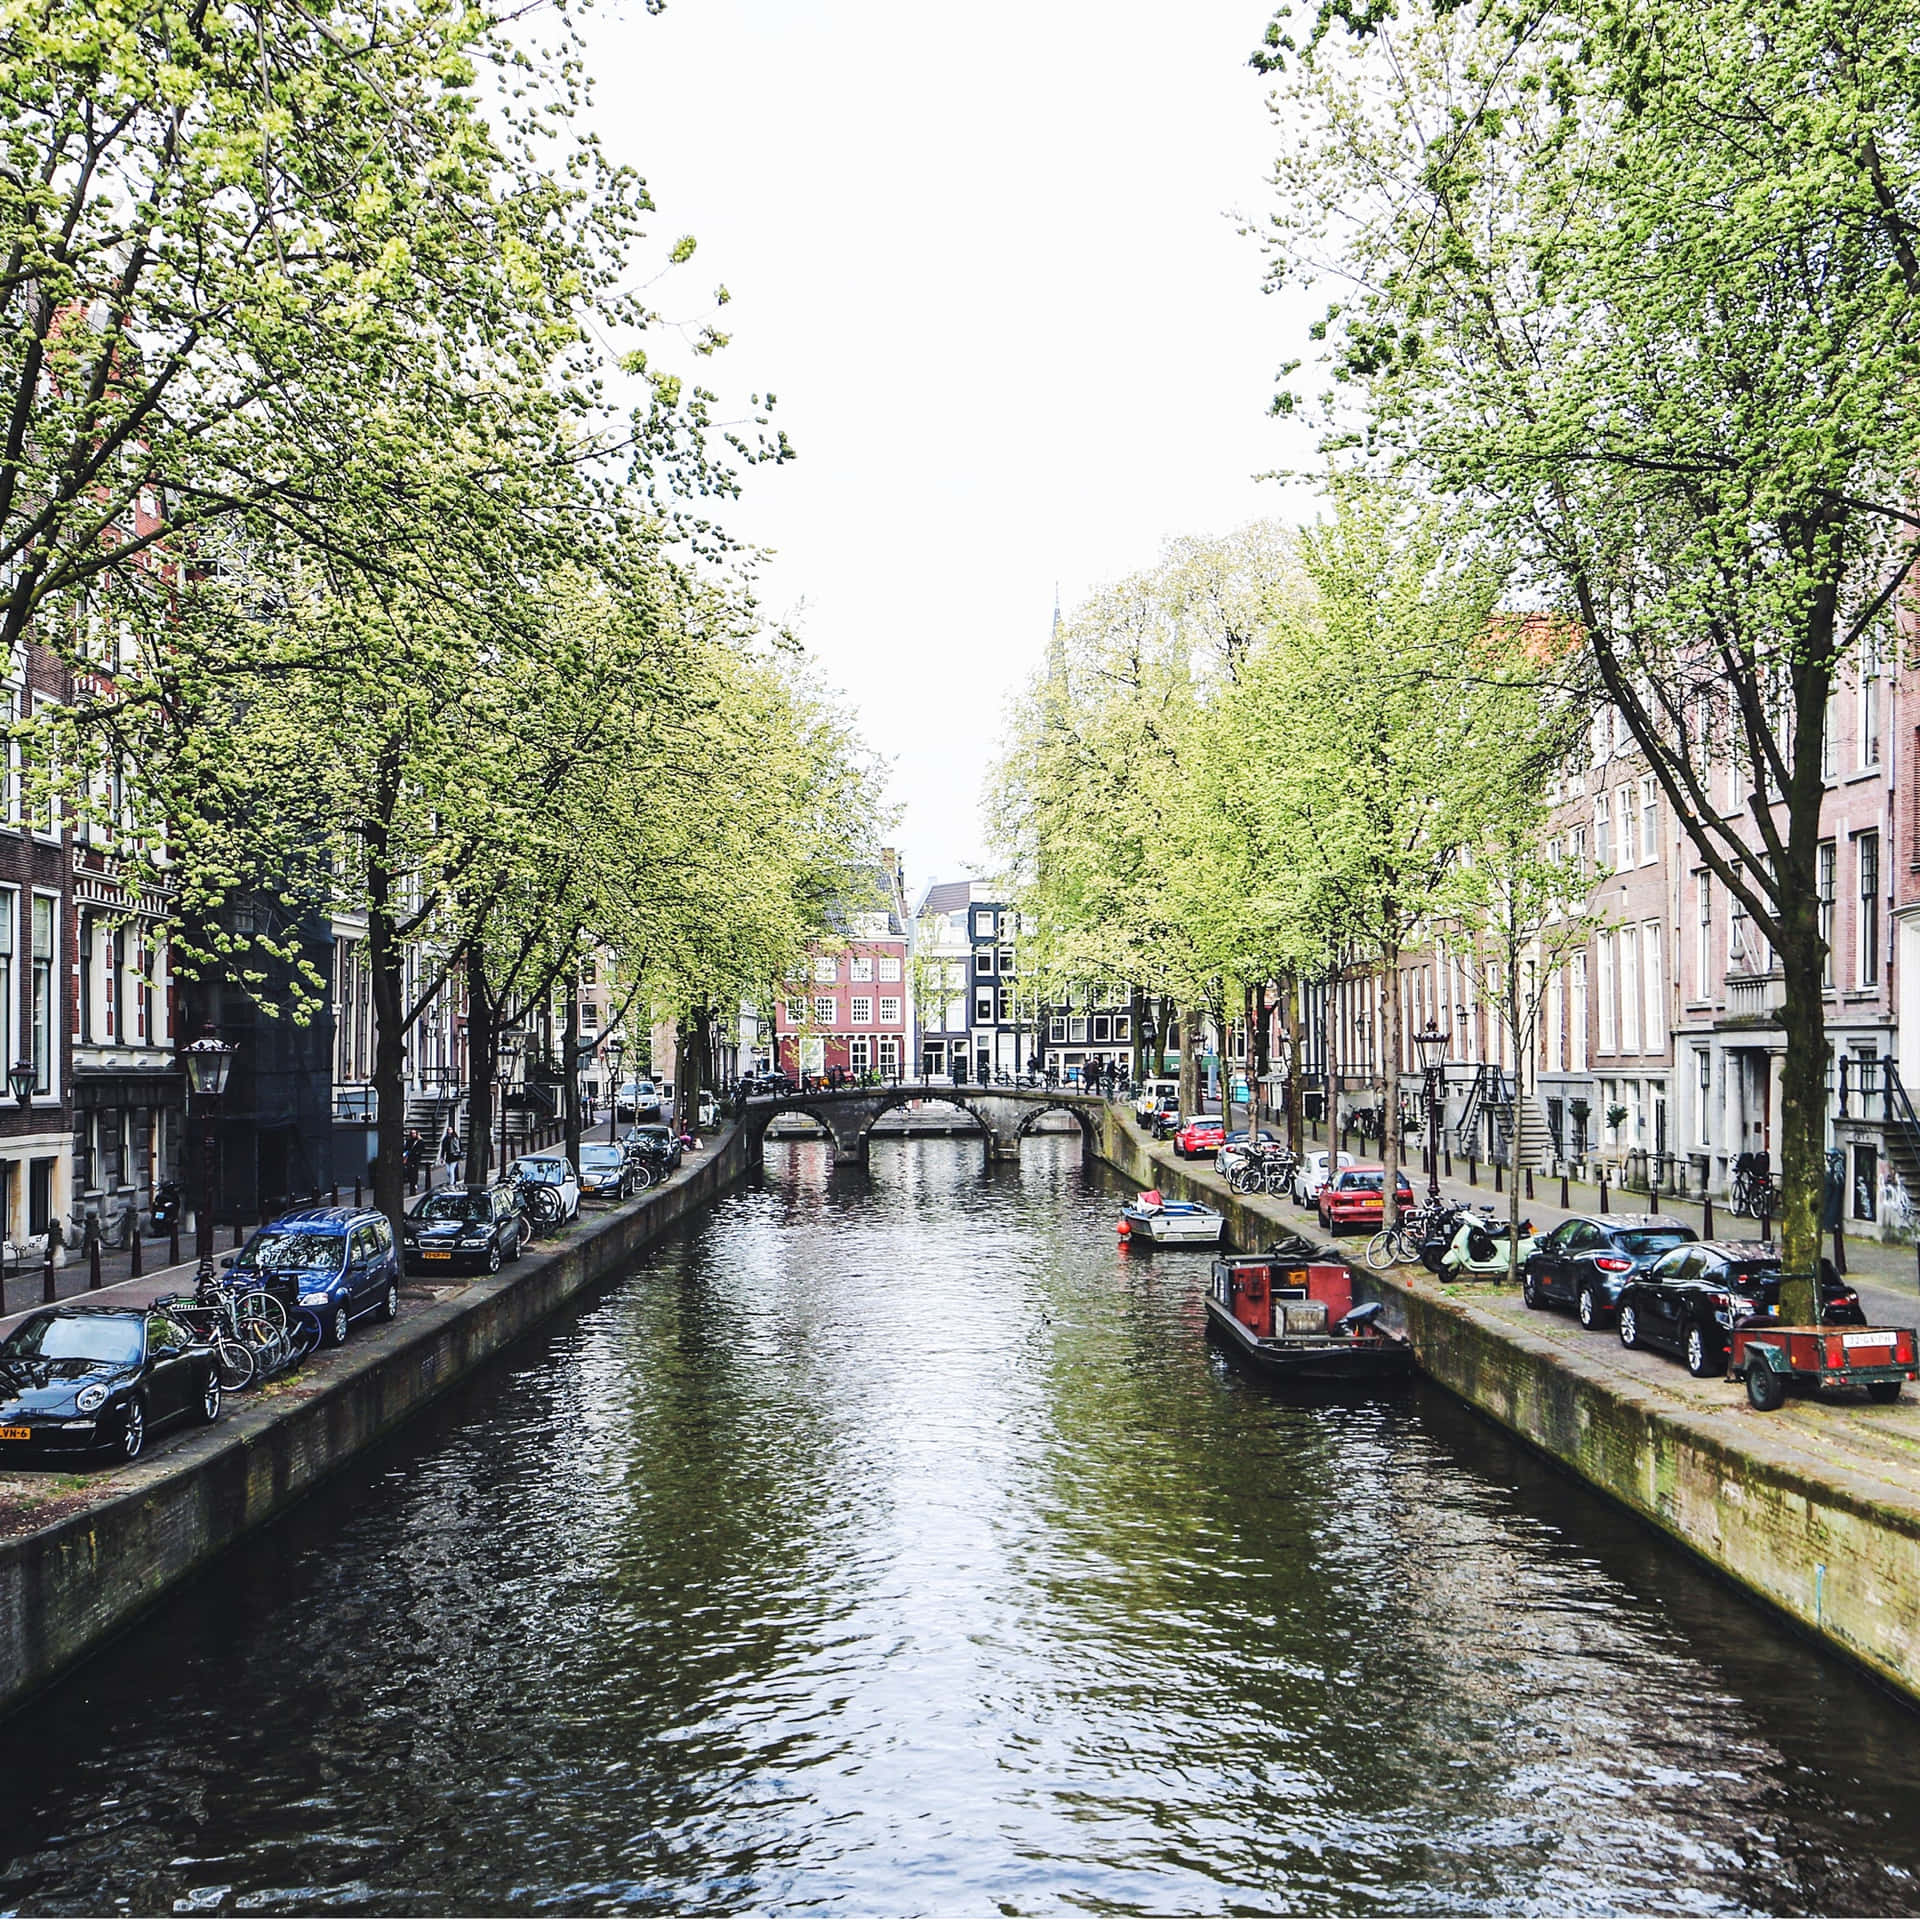 Strolling along the canals of Amsterdam in the spring Wallpaper